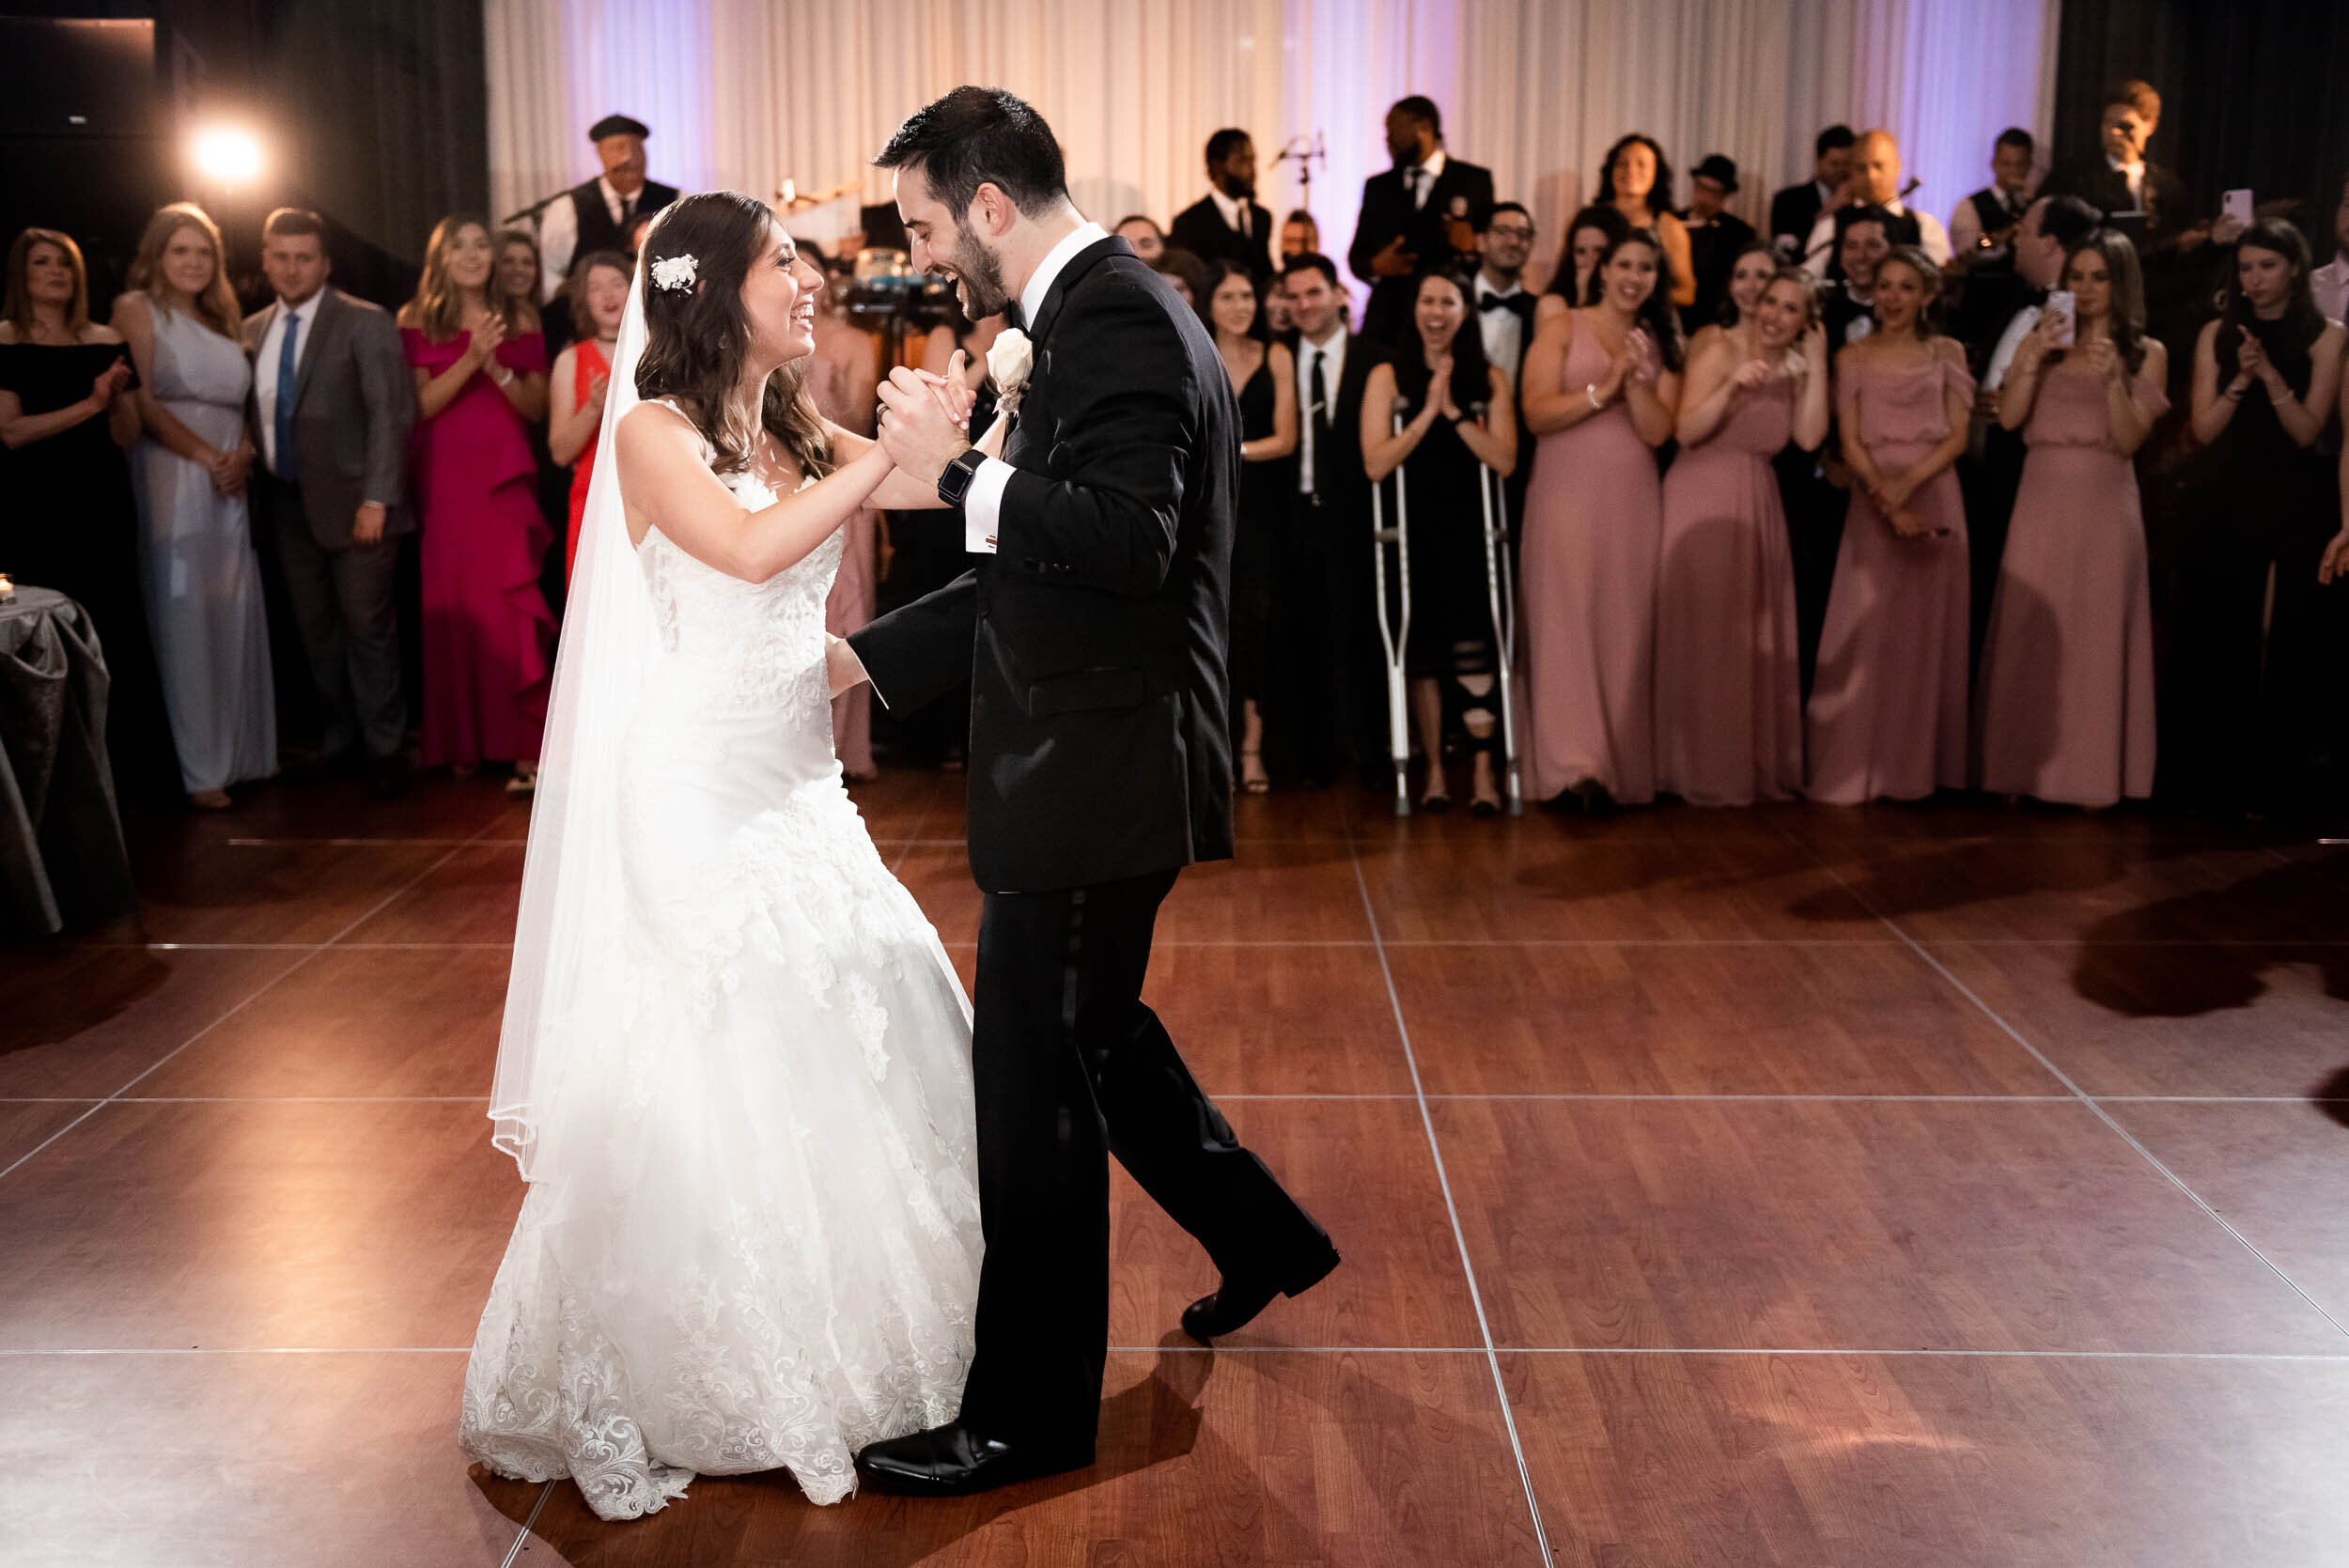 Wedding dancing photography: Loews Chicago Hotel Wedding captured by J. Brown Photography